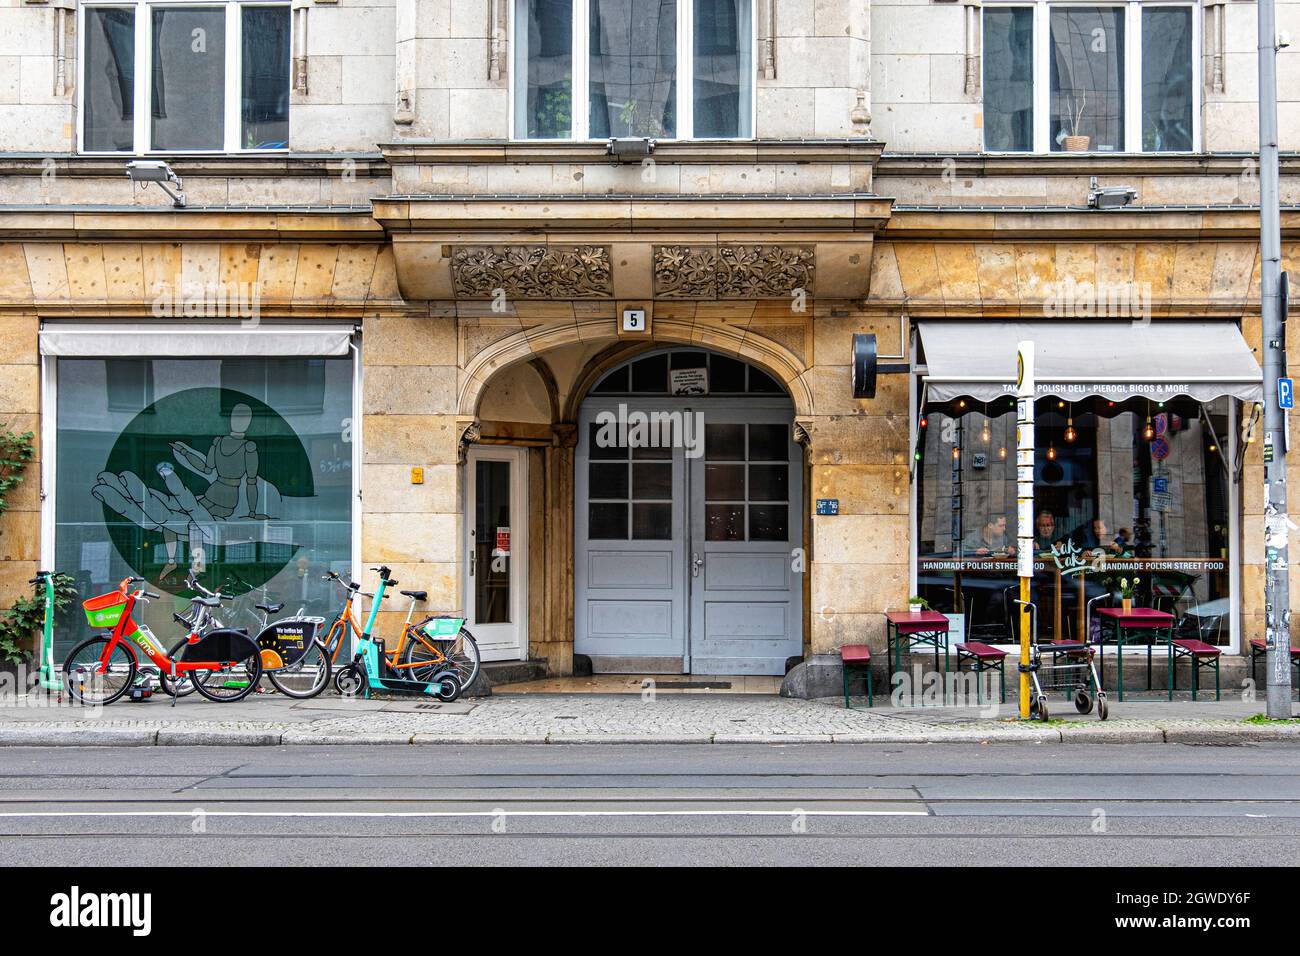 Tak tak Polish deli in Historic old apartment building and rental bikes and scooters on pavement, Brunnenstrasse 6, Mitte, Berlin, Germany Stock Photo